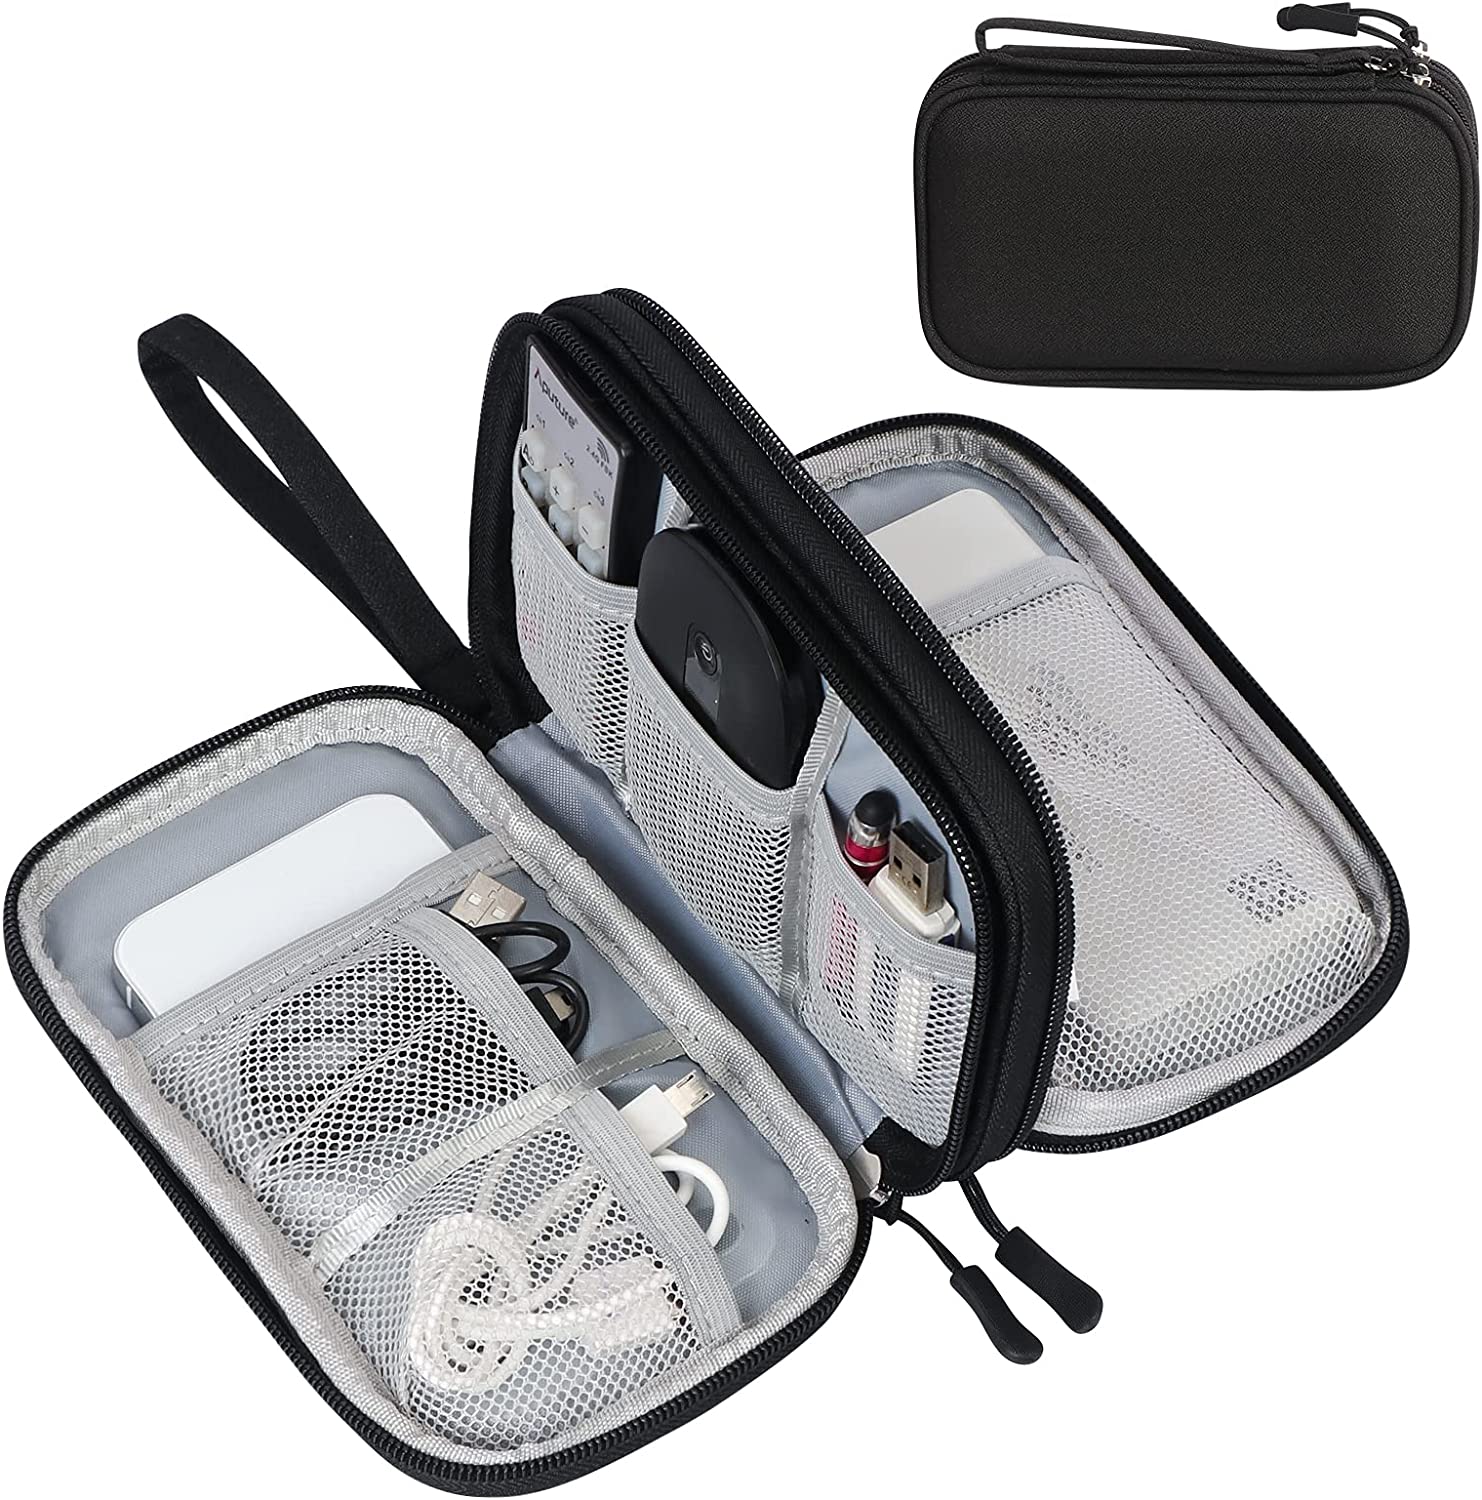 travel cable organizer detailed review